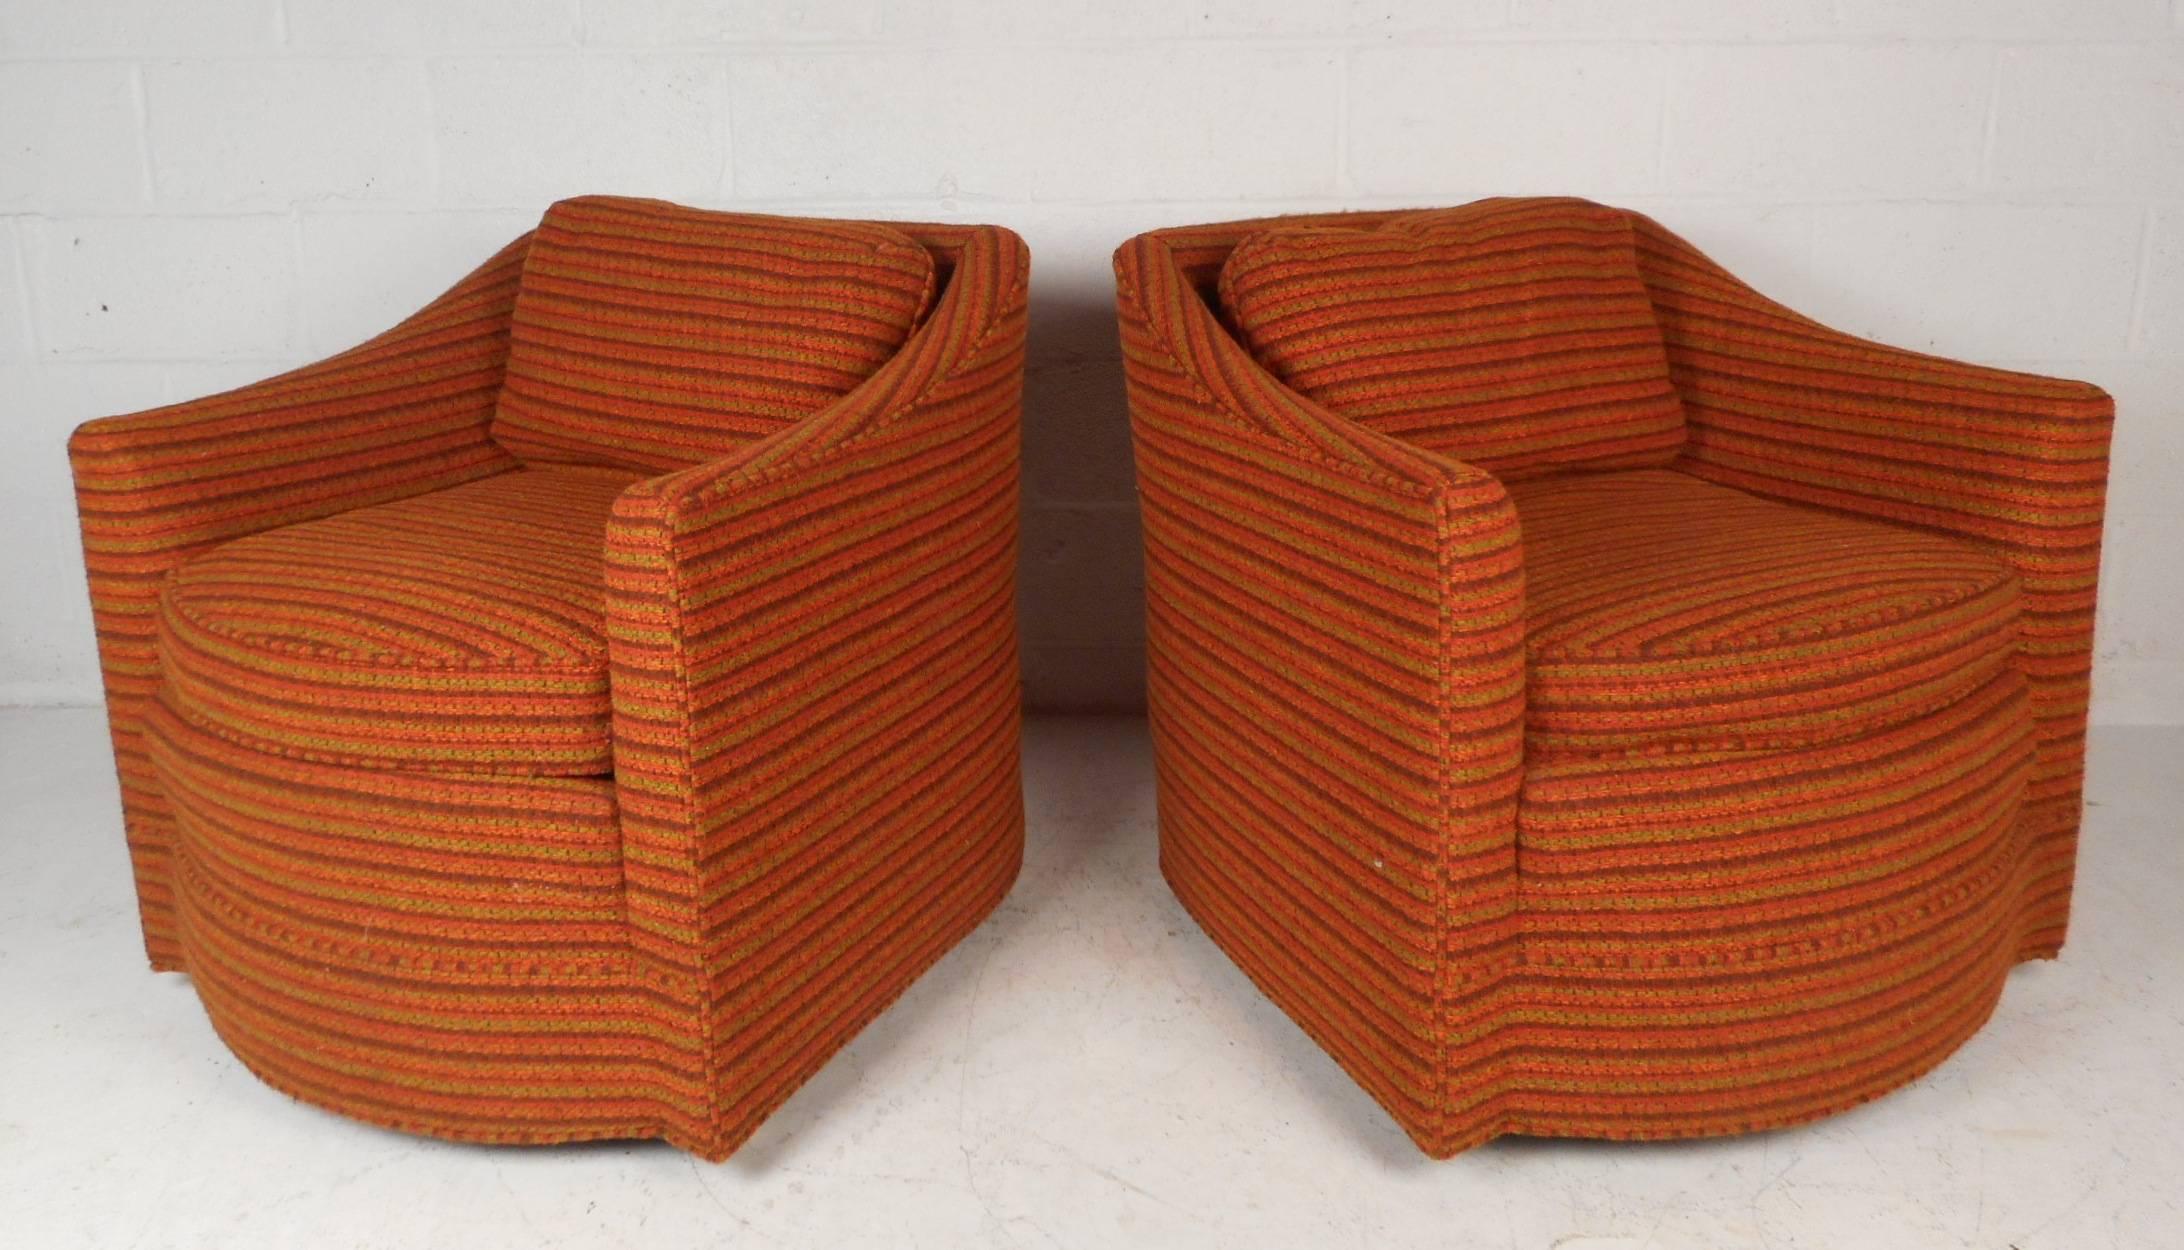 This beautiful pair of vintage modern lounge chairs feature plush orange upholstery and thick padded cushions ensuring plenty of comfort. Sleek design with sloping arm rests, a rounded front, and wide seating. This unique pair sits on top of wheels